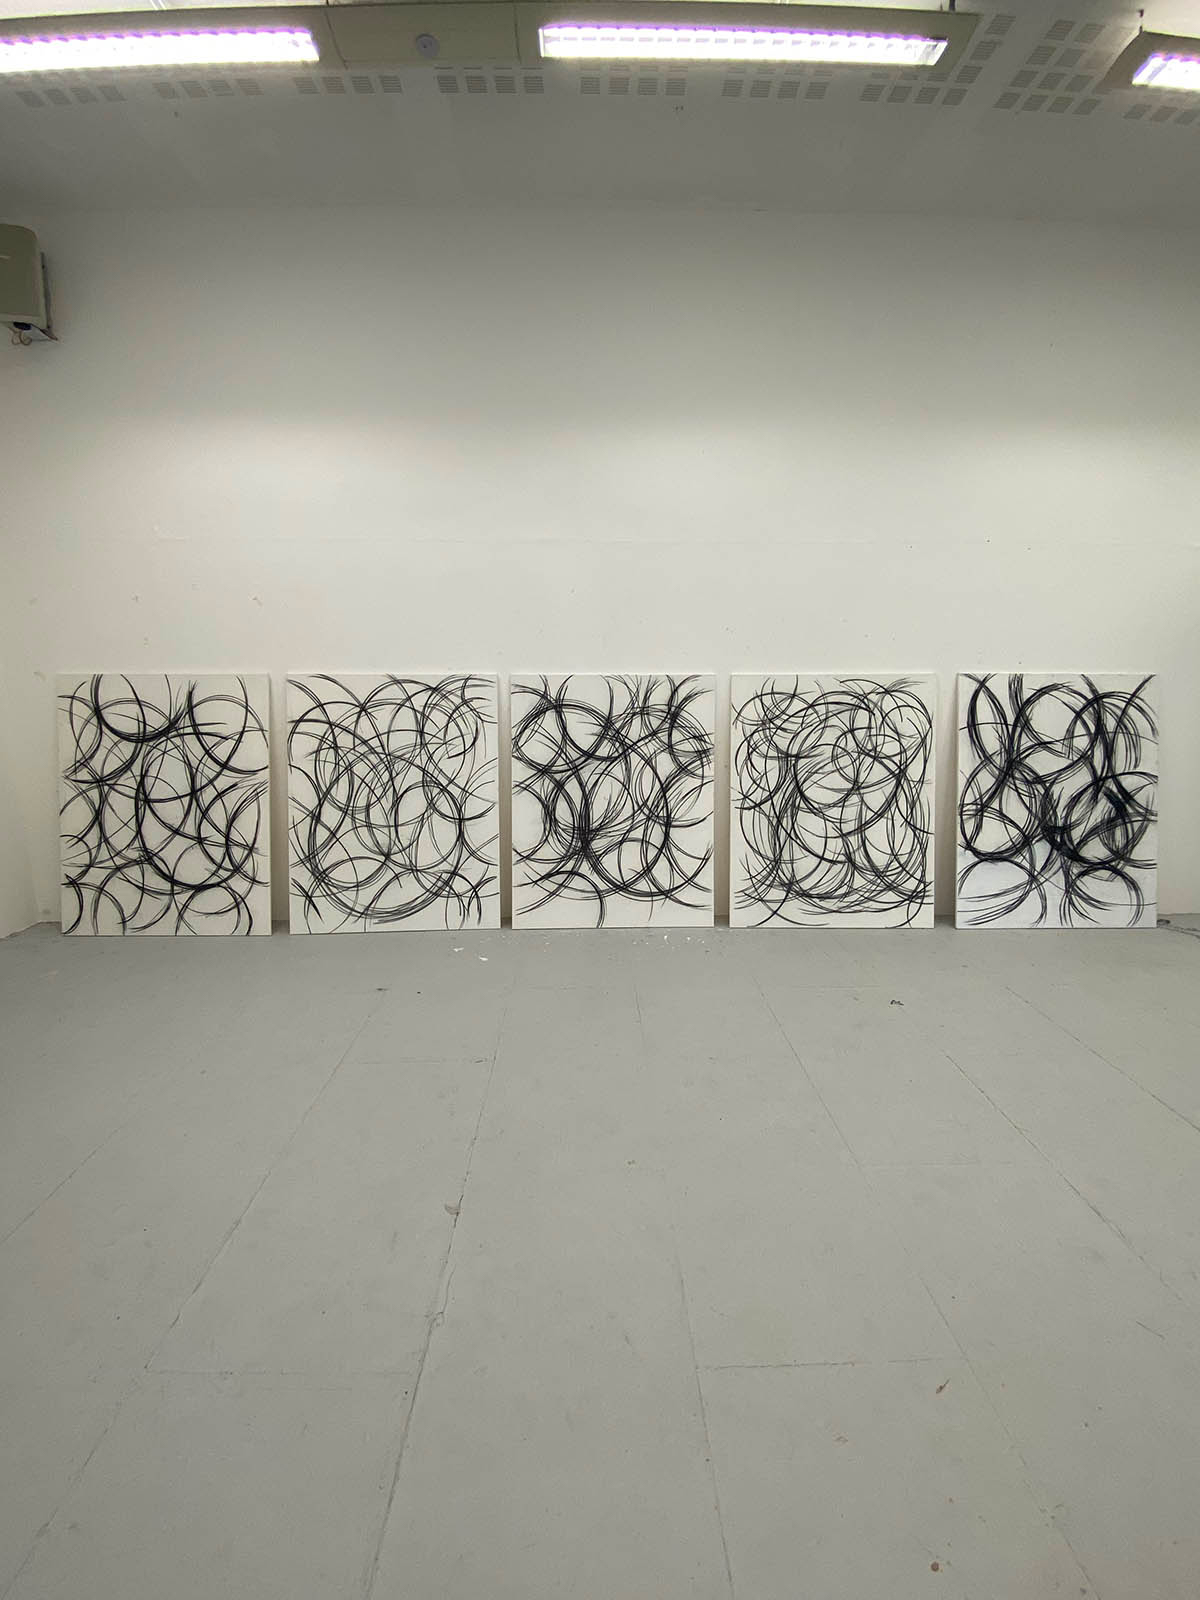 A picture of five canvases standing against a wall, each covered in charcoal-drawn swirls.